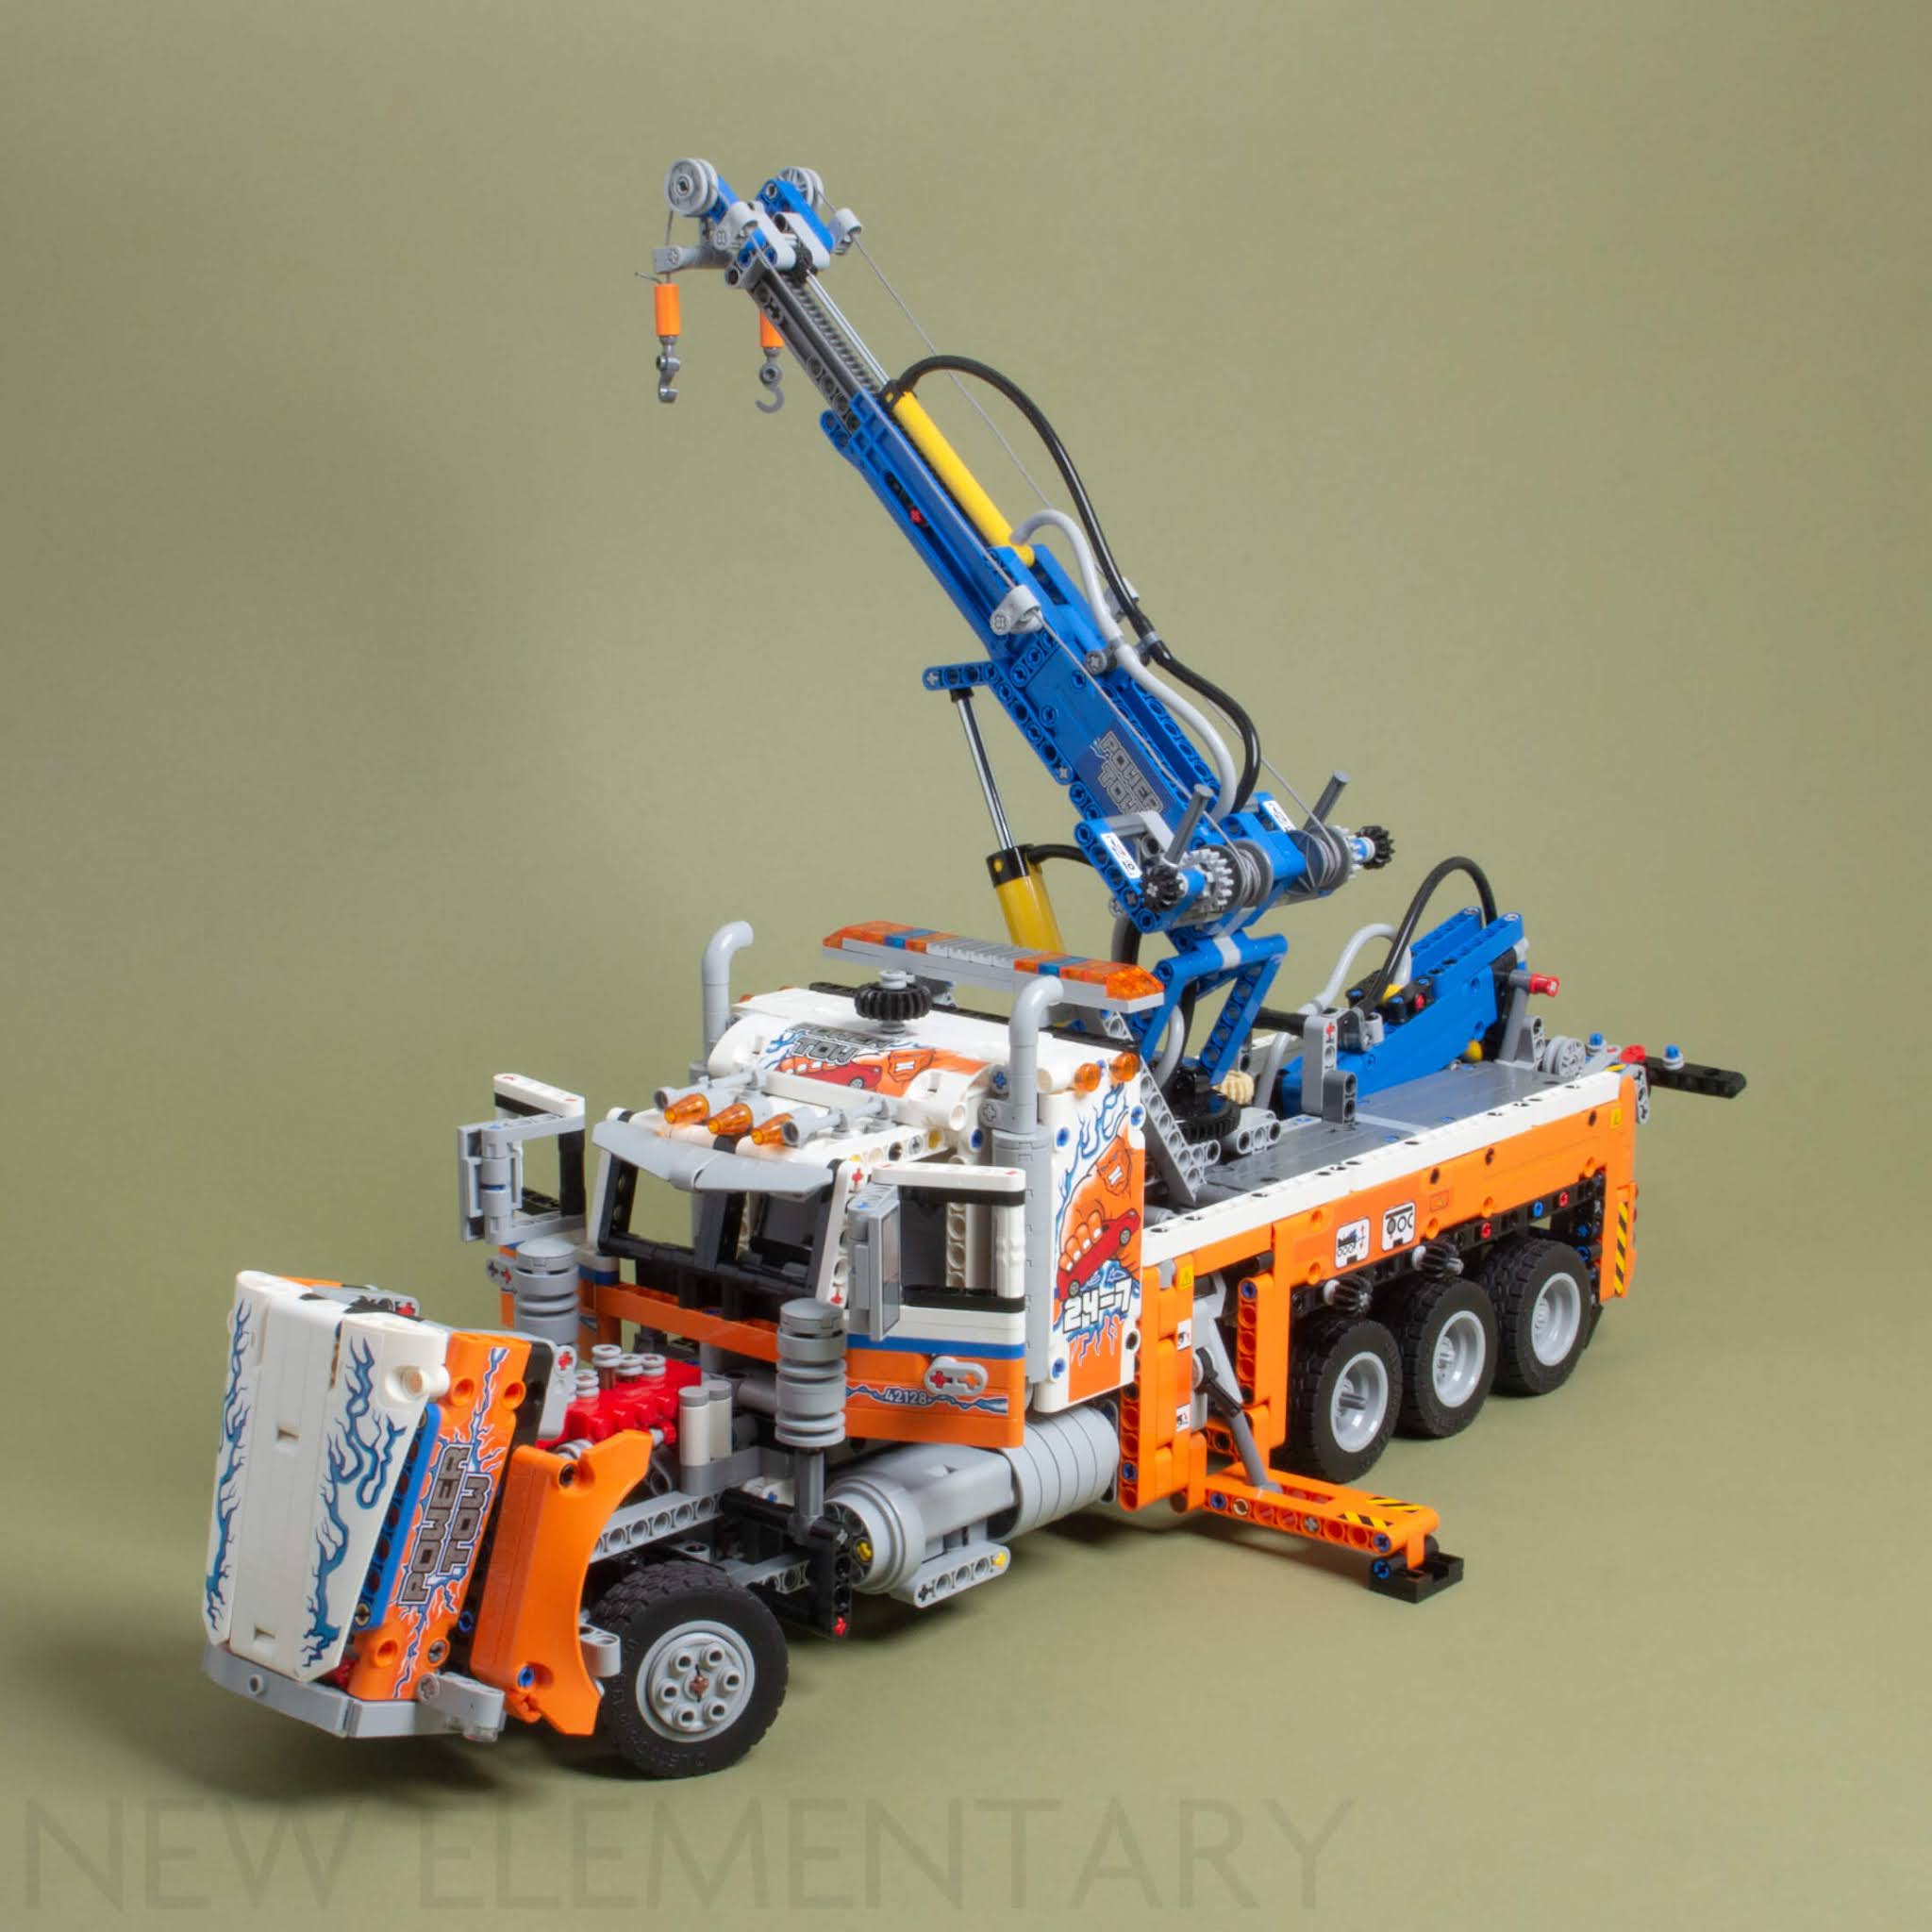 LEGO® Technic review: 42128 Tow Truck | New Elementary: LEGO® parts, sets and